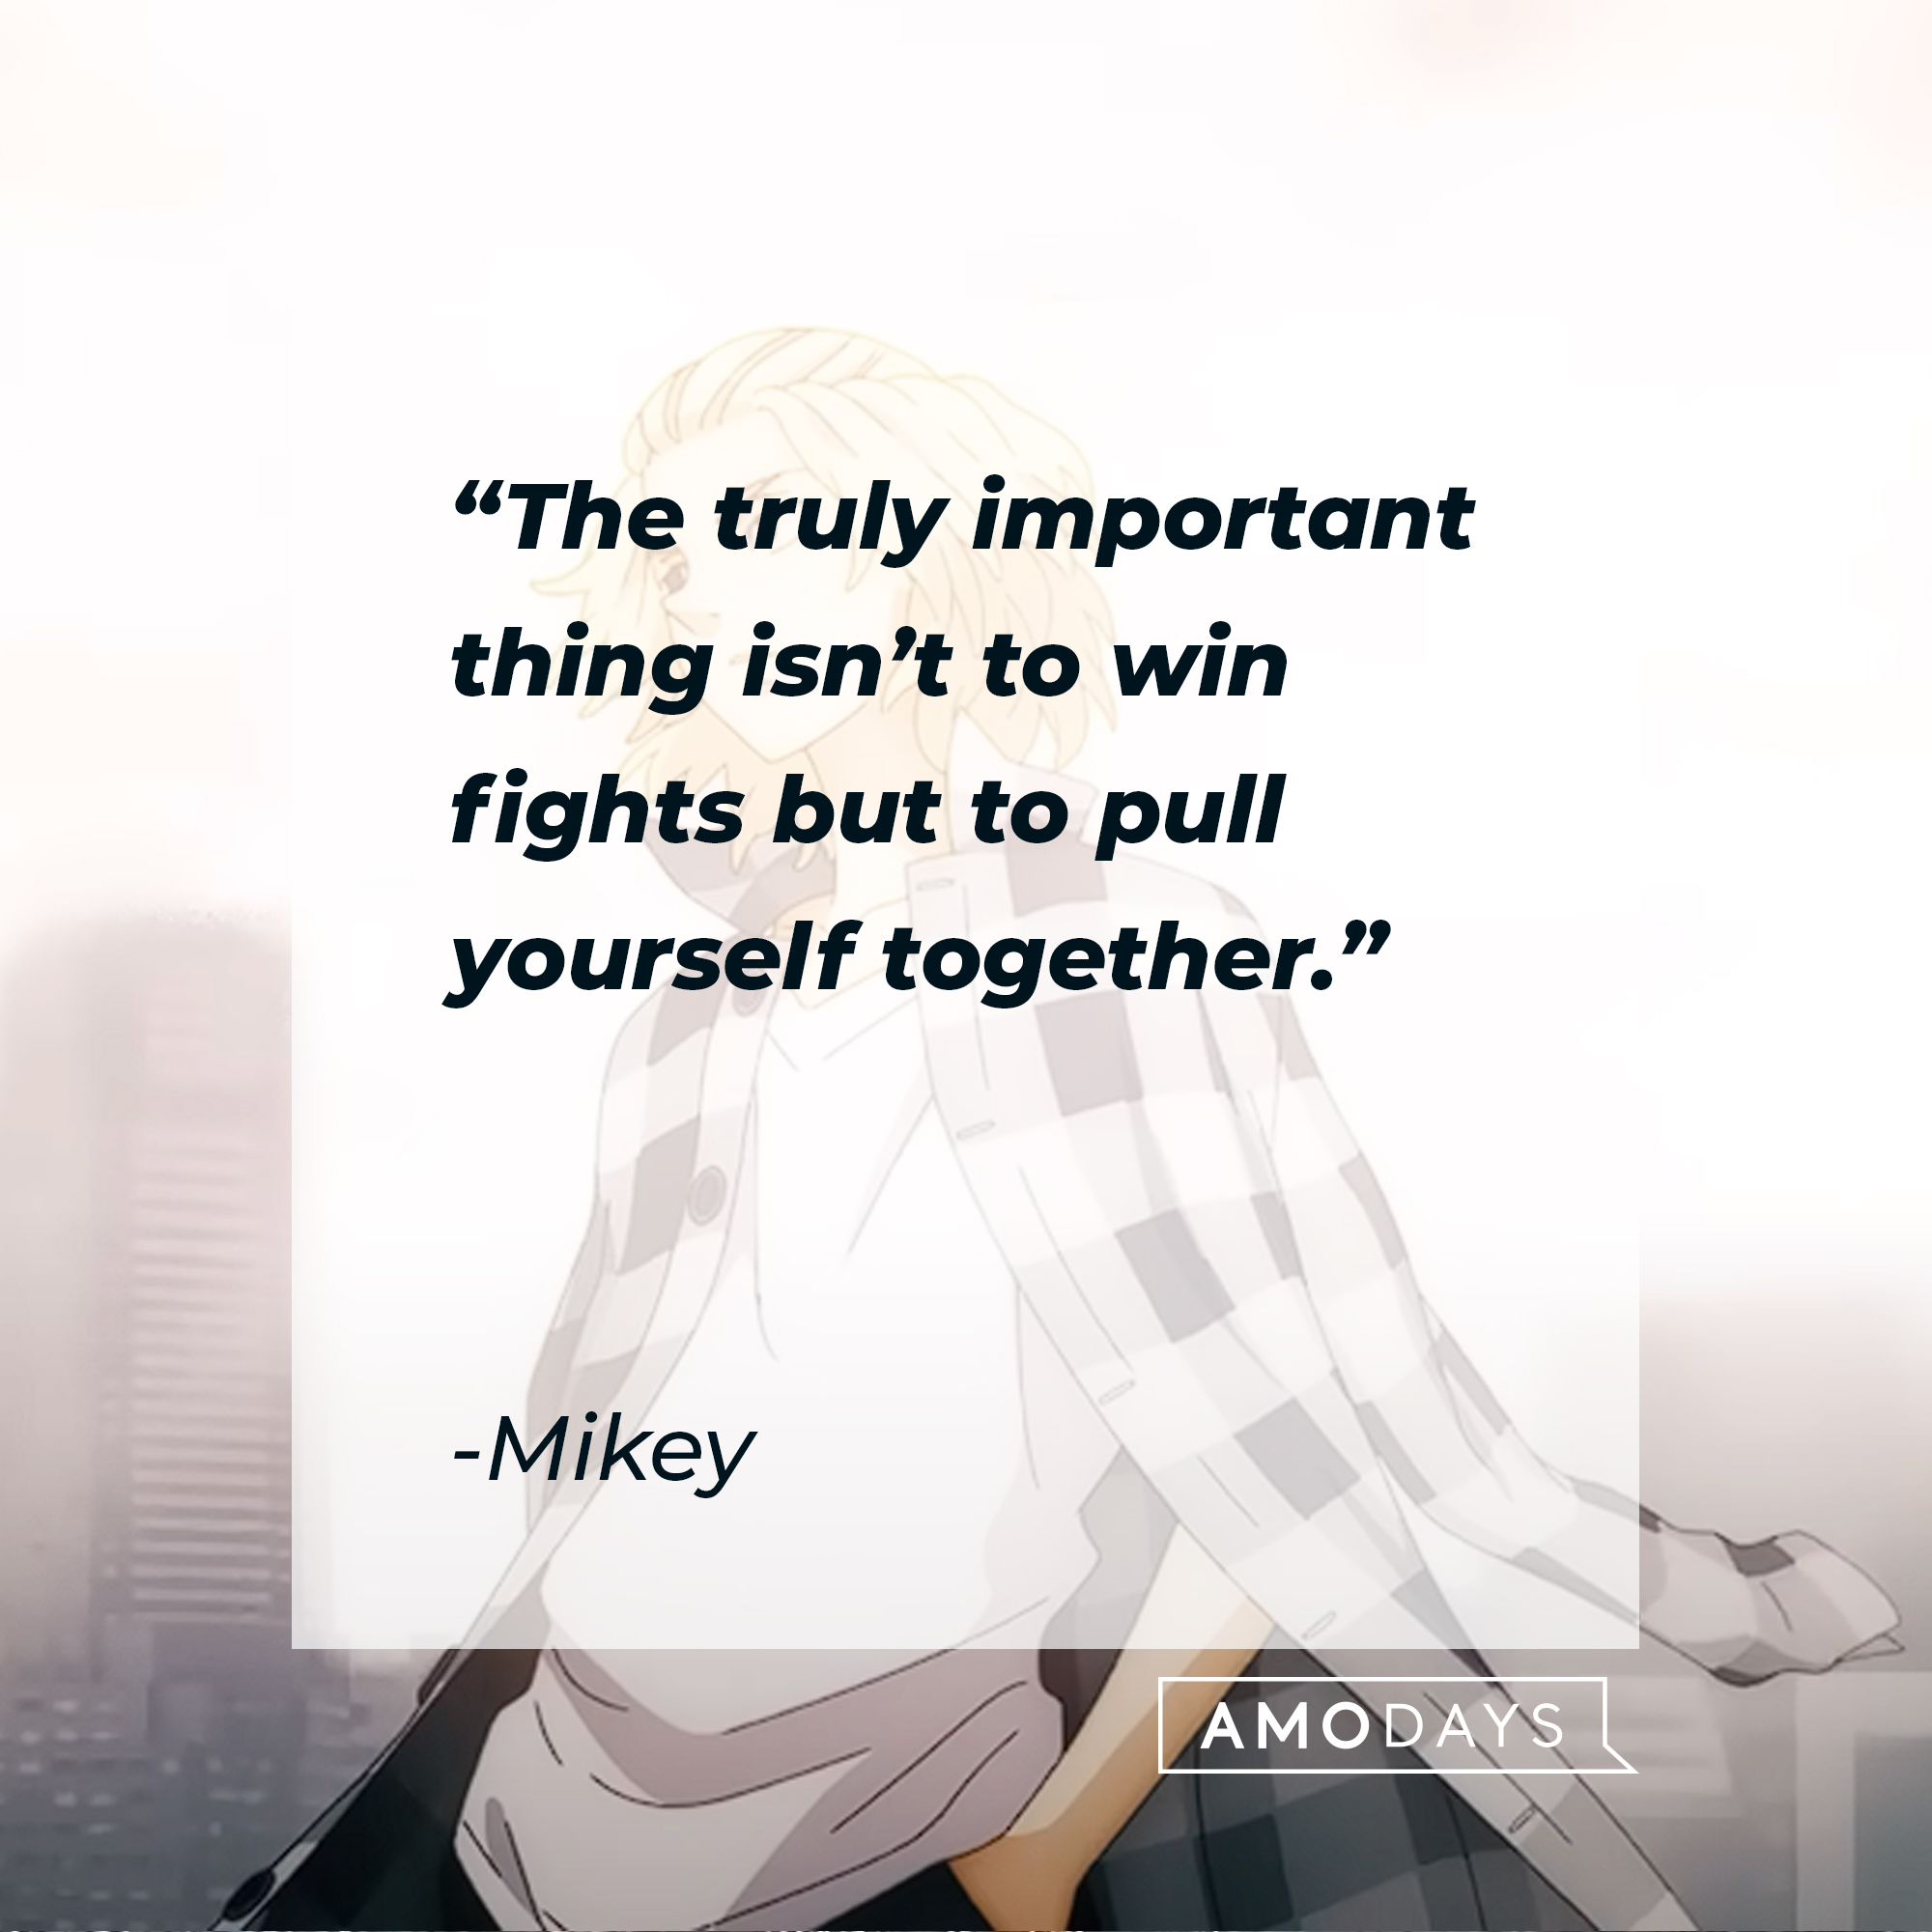 An image of Mikey with his quote: “The truly important thing isn’t to win fights but to pull yourself together.” | Source: youtube.com/CrunchyrollCollection